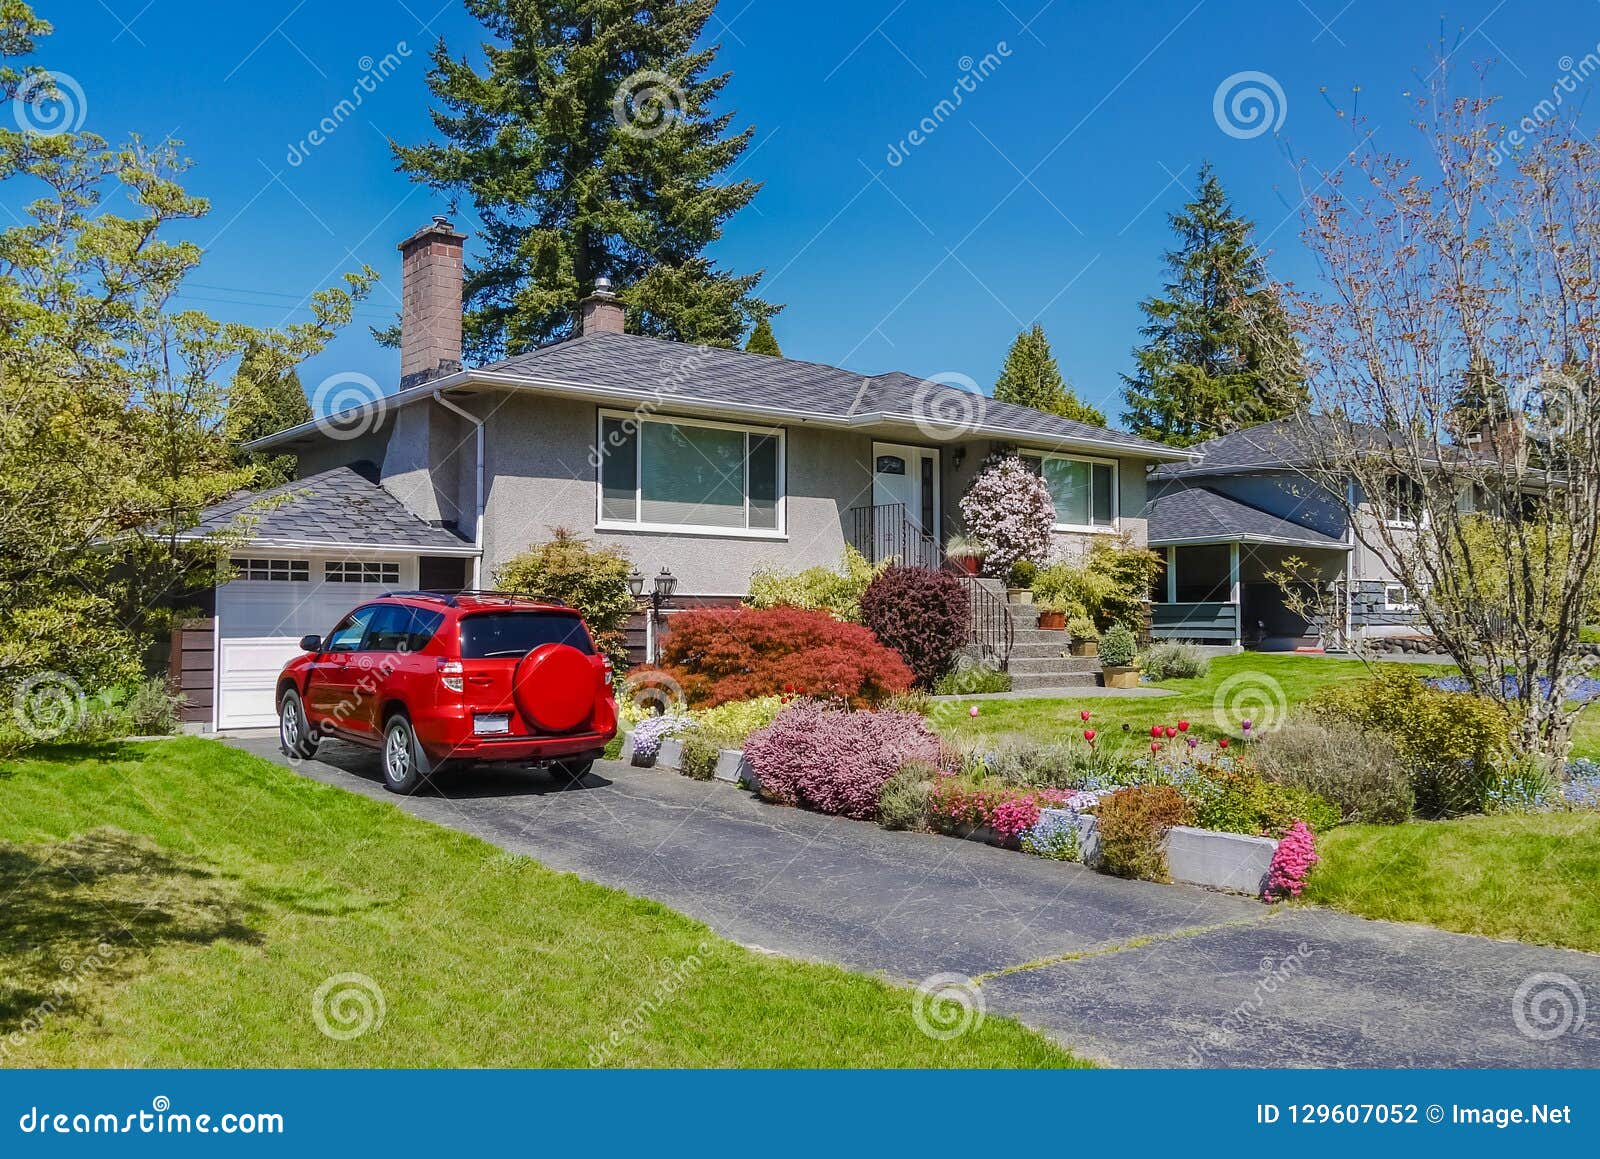 modest residential house with red car parked on driveway in front. family house with blossoming flowers on the yard